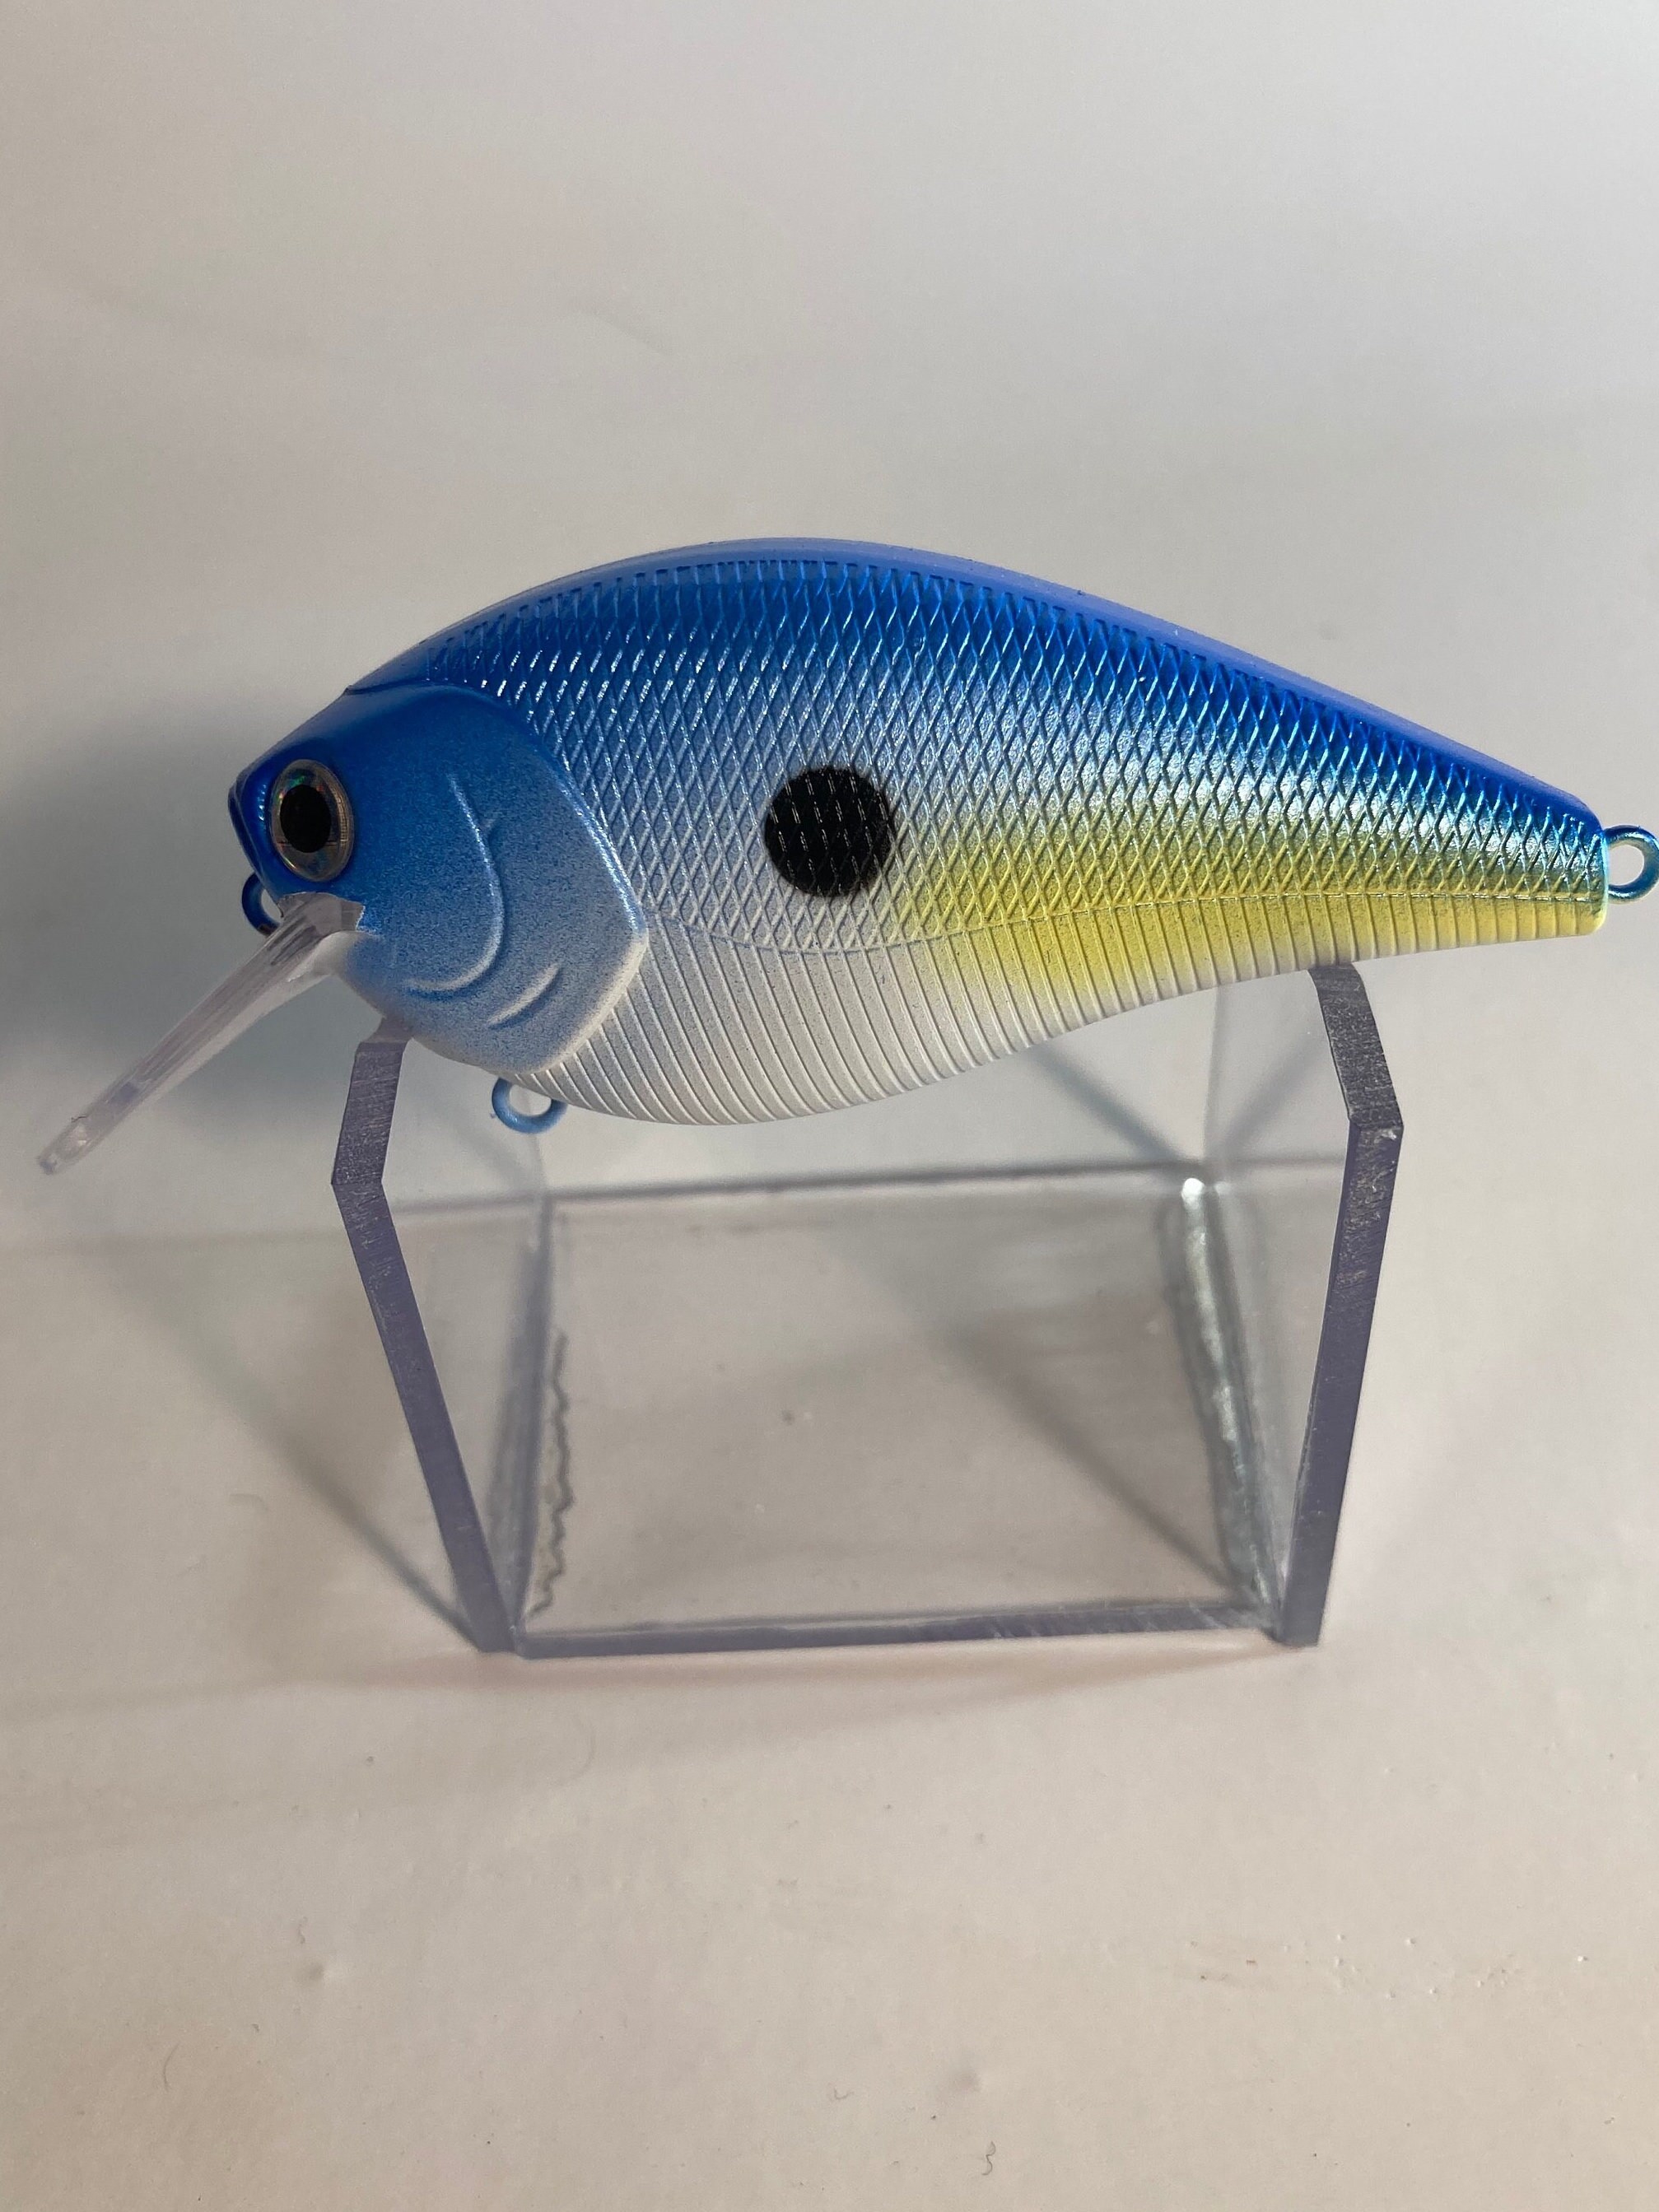 The Blue and Yellow Shad Custom Hand Painted Rattling Square Bill Crankbait  Fishing Lure 